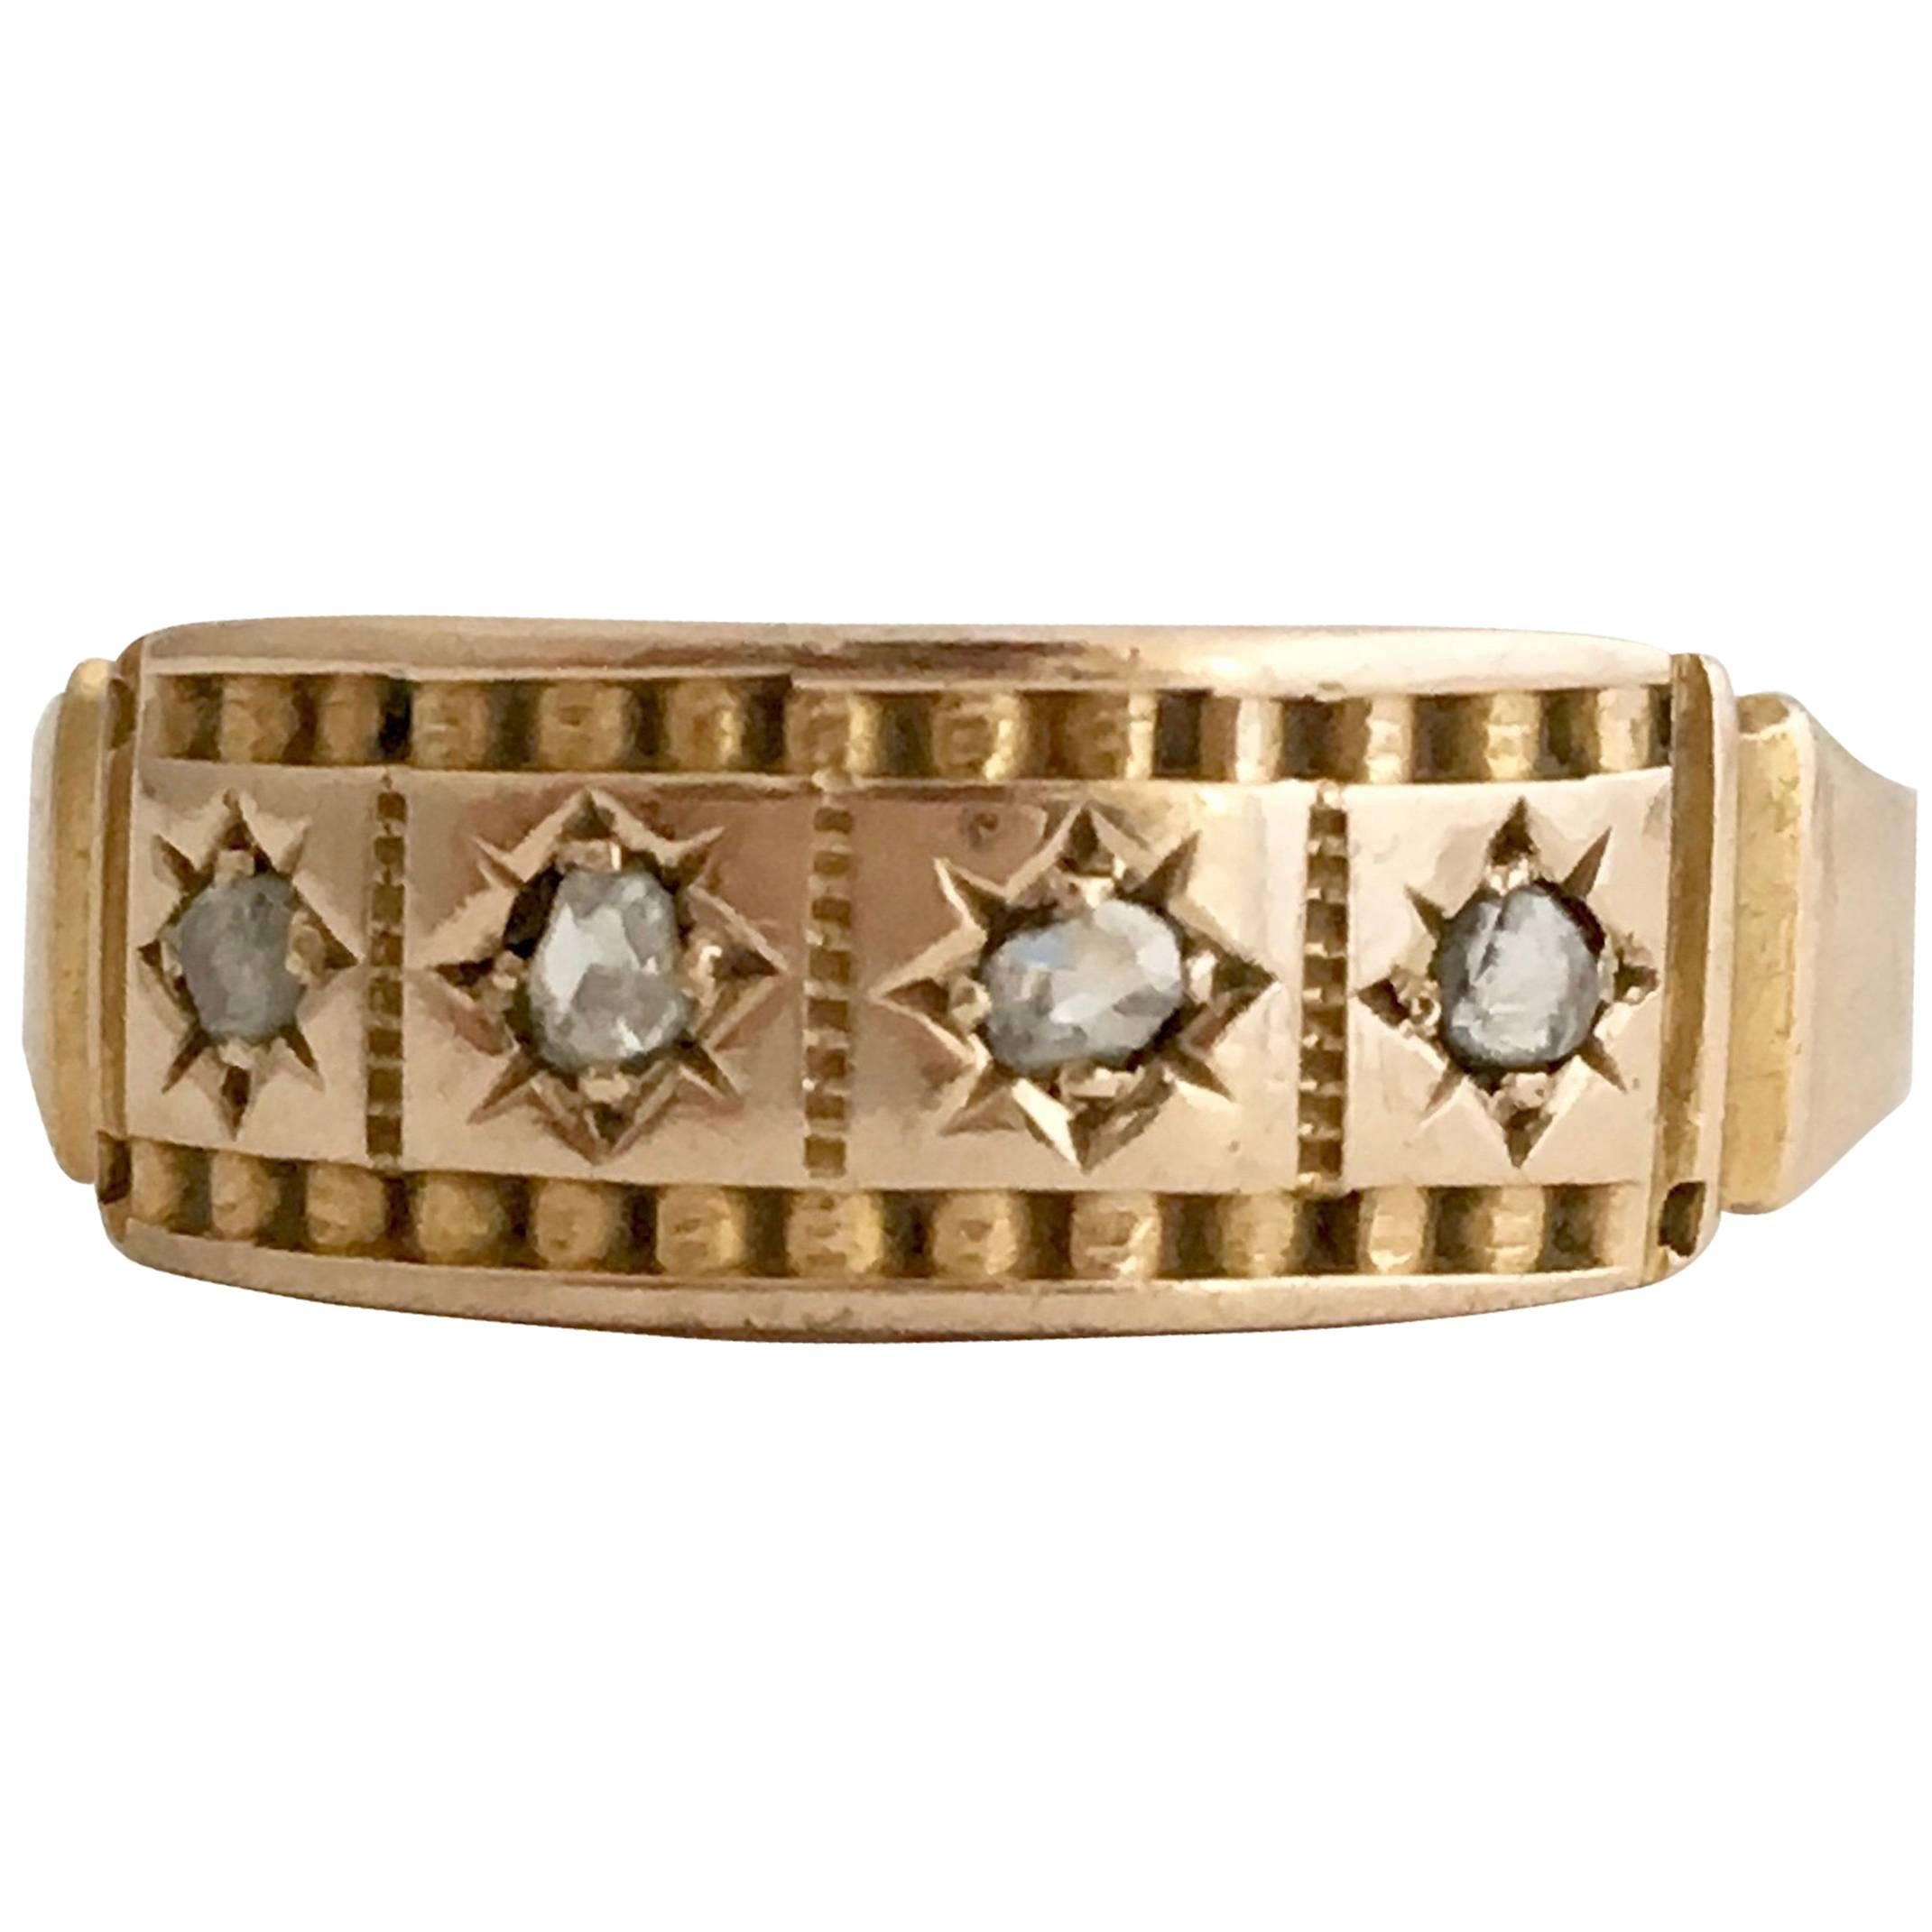 15ct Gold Rose Cut Diamond Chip Ring Antique Gypsy Set Star Band Etruscan Detail